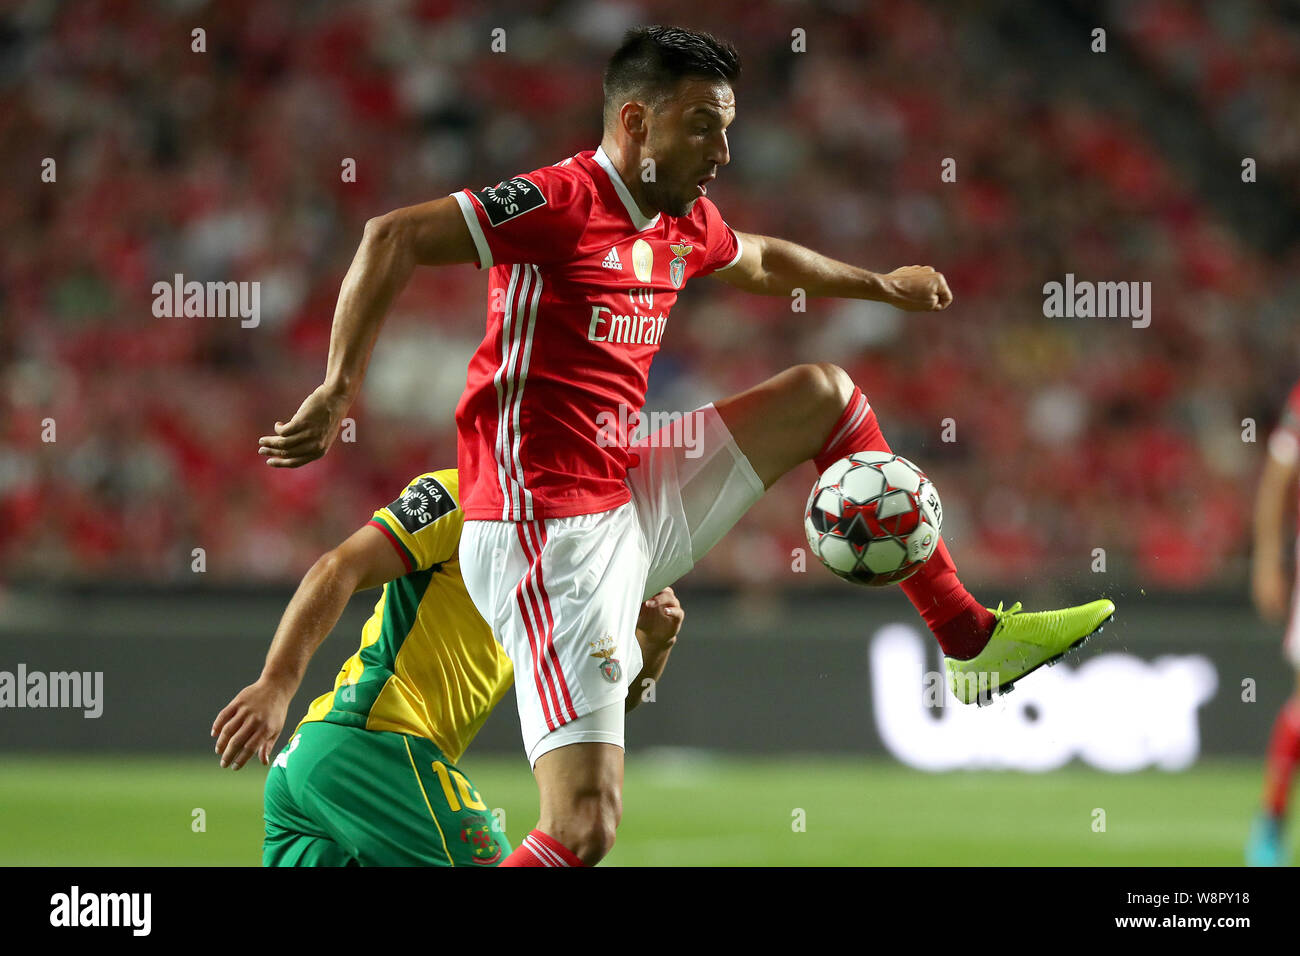 Lisbon, Portugal. 10th Aug, 2019. Benfica's Andreas Samaris controls the ball during the Portuguese league football match between Benfica and Pacos de Ferreira in Lisbon, Portugal, on Aug. 10, 2019. Credit: Petro Fiuza/Xinhua/Alamy Live News Stock Photo